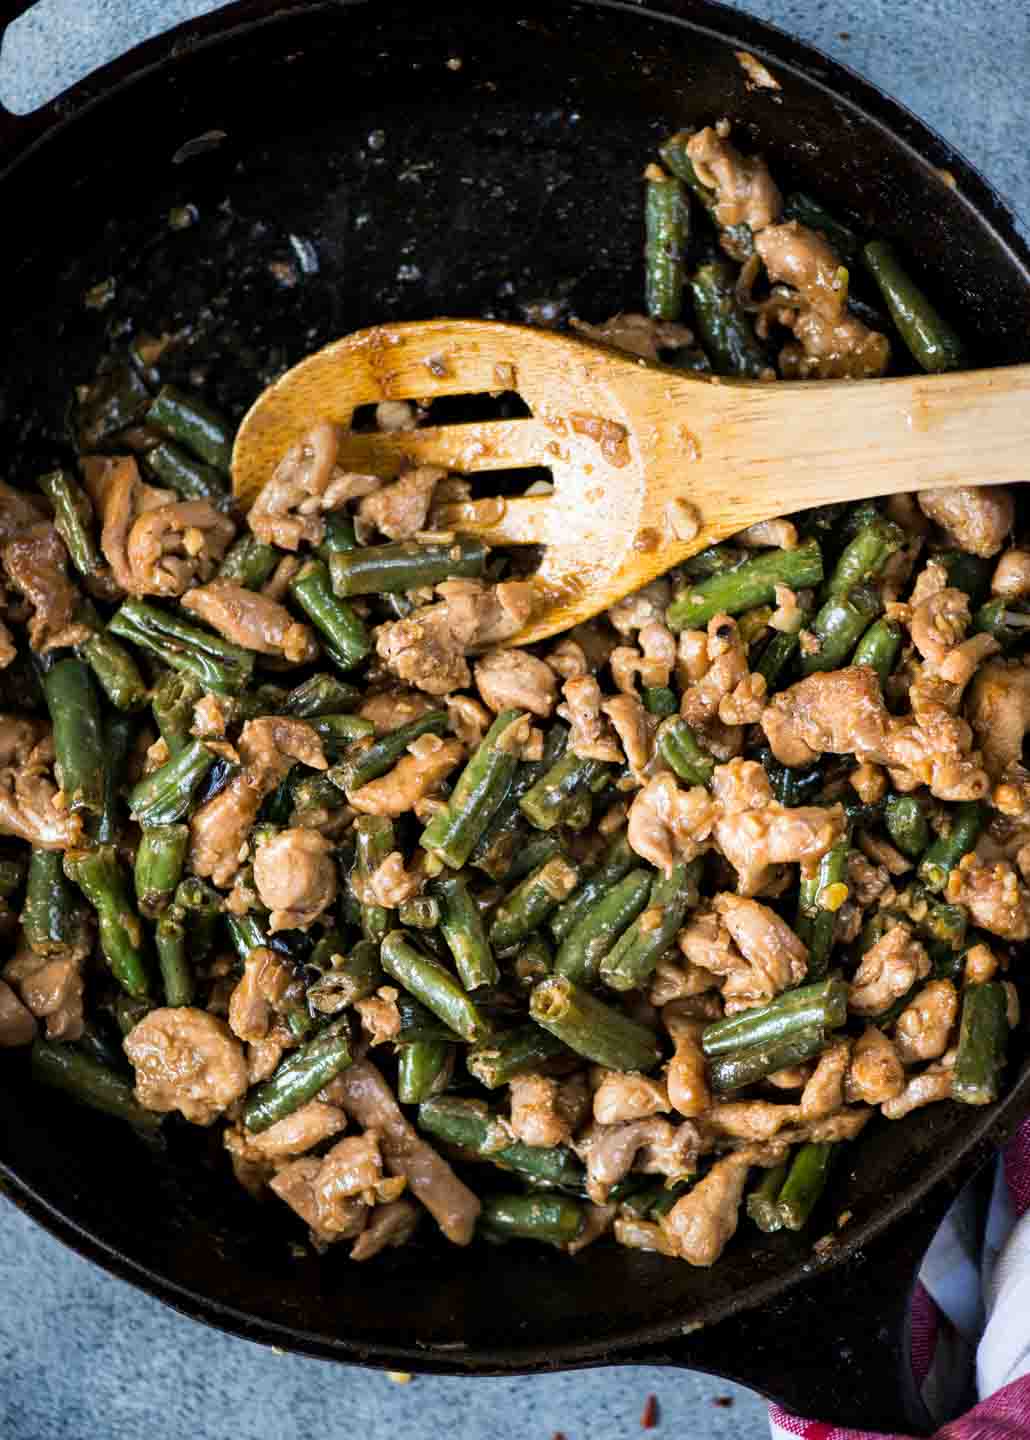 Packed with umami, this Chicken and Beans Stir Fry made with Chicken thighs, green beans tossed in a flavorful stir fry sauce.